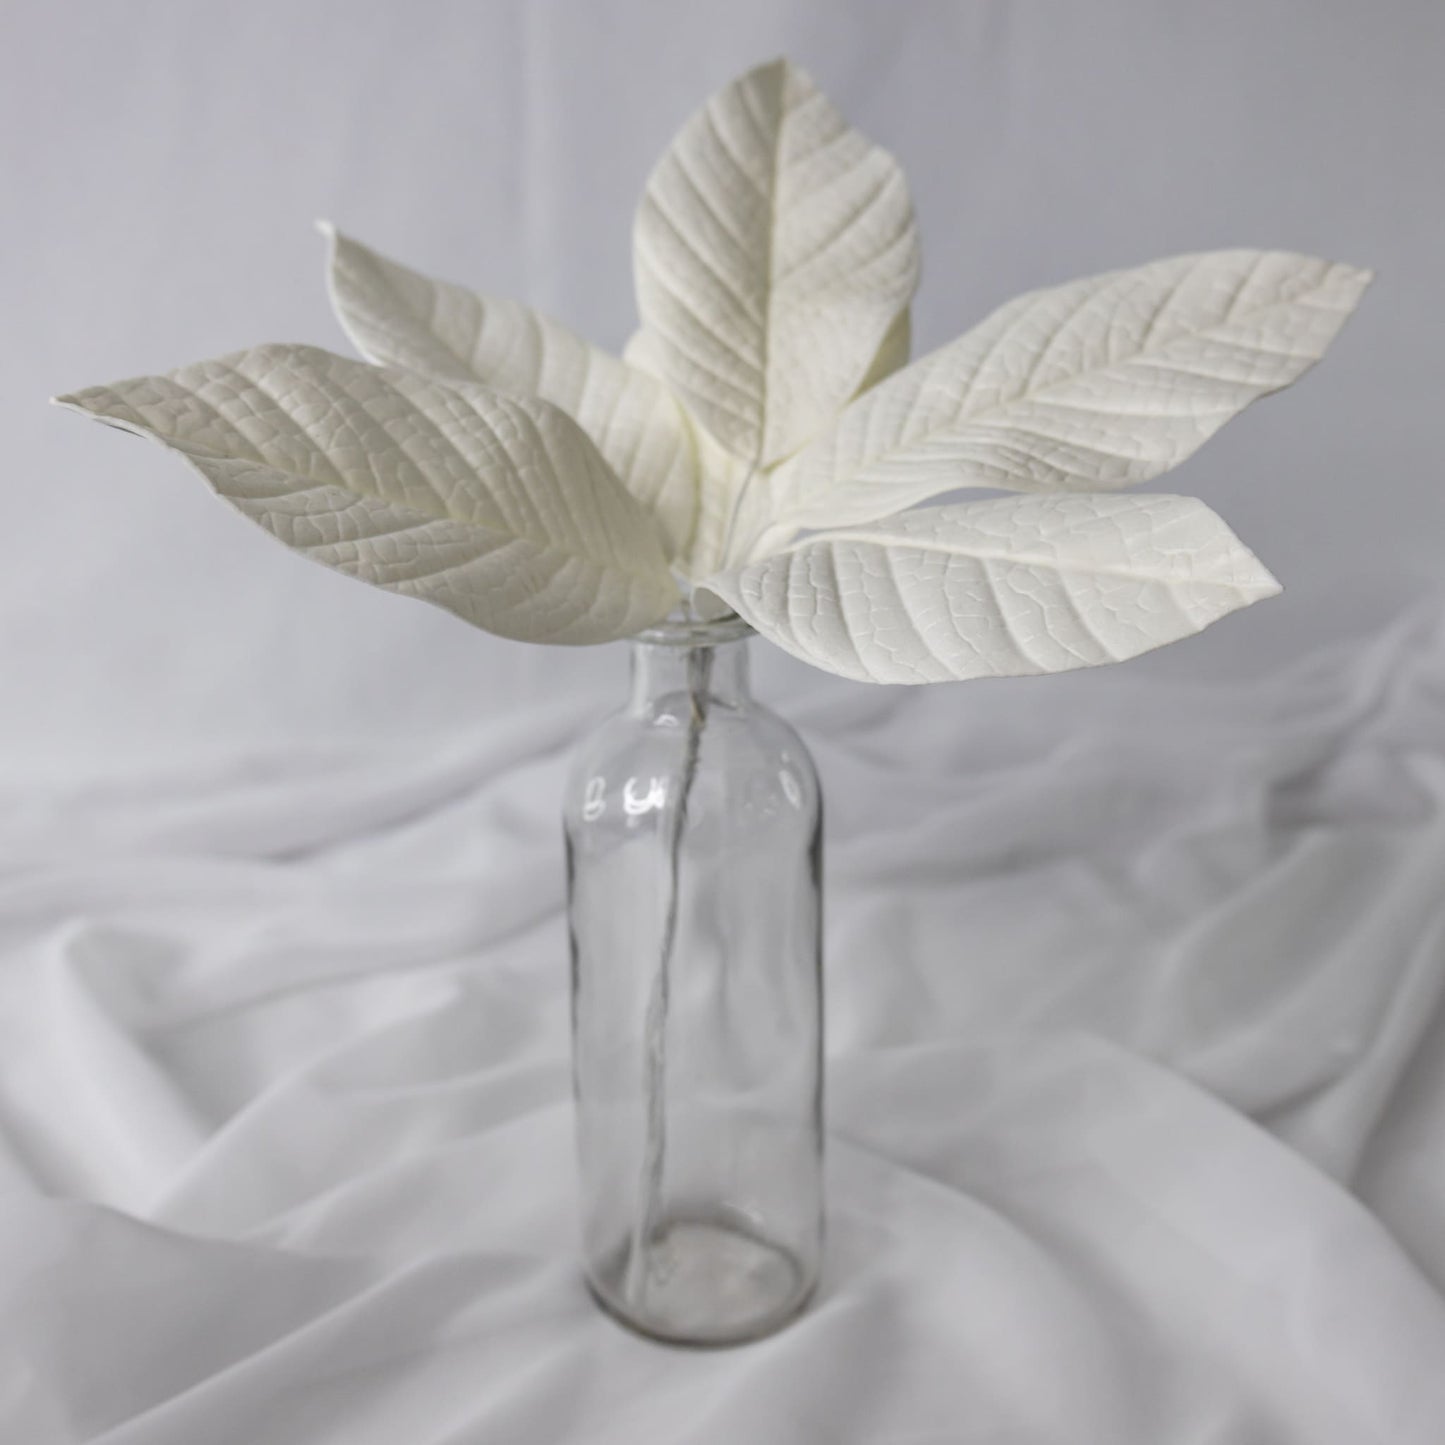 artificial white gardenia leaves placed in transparent glass vase